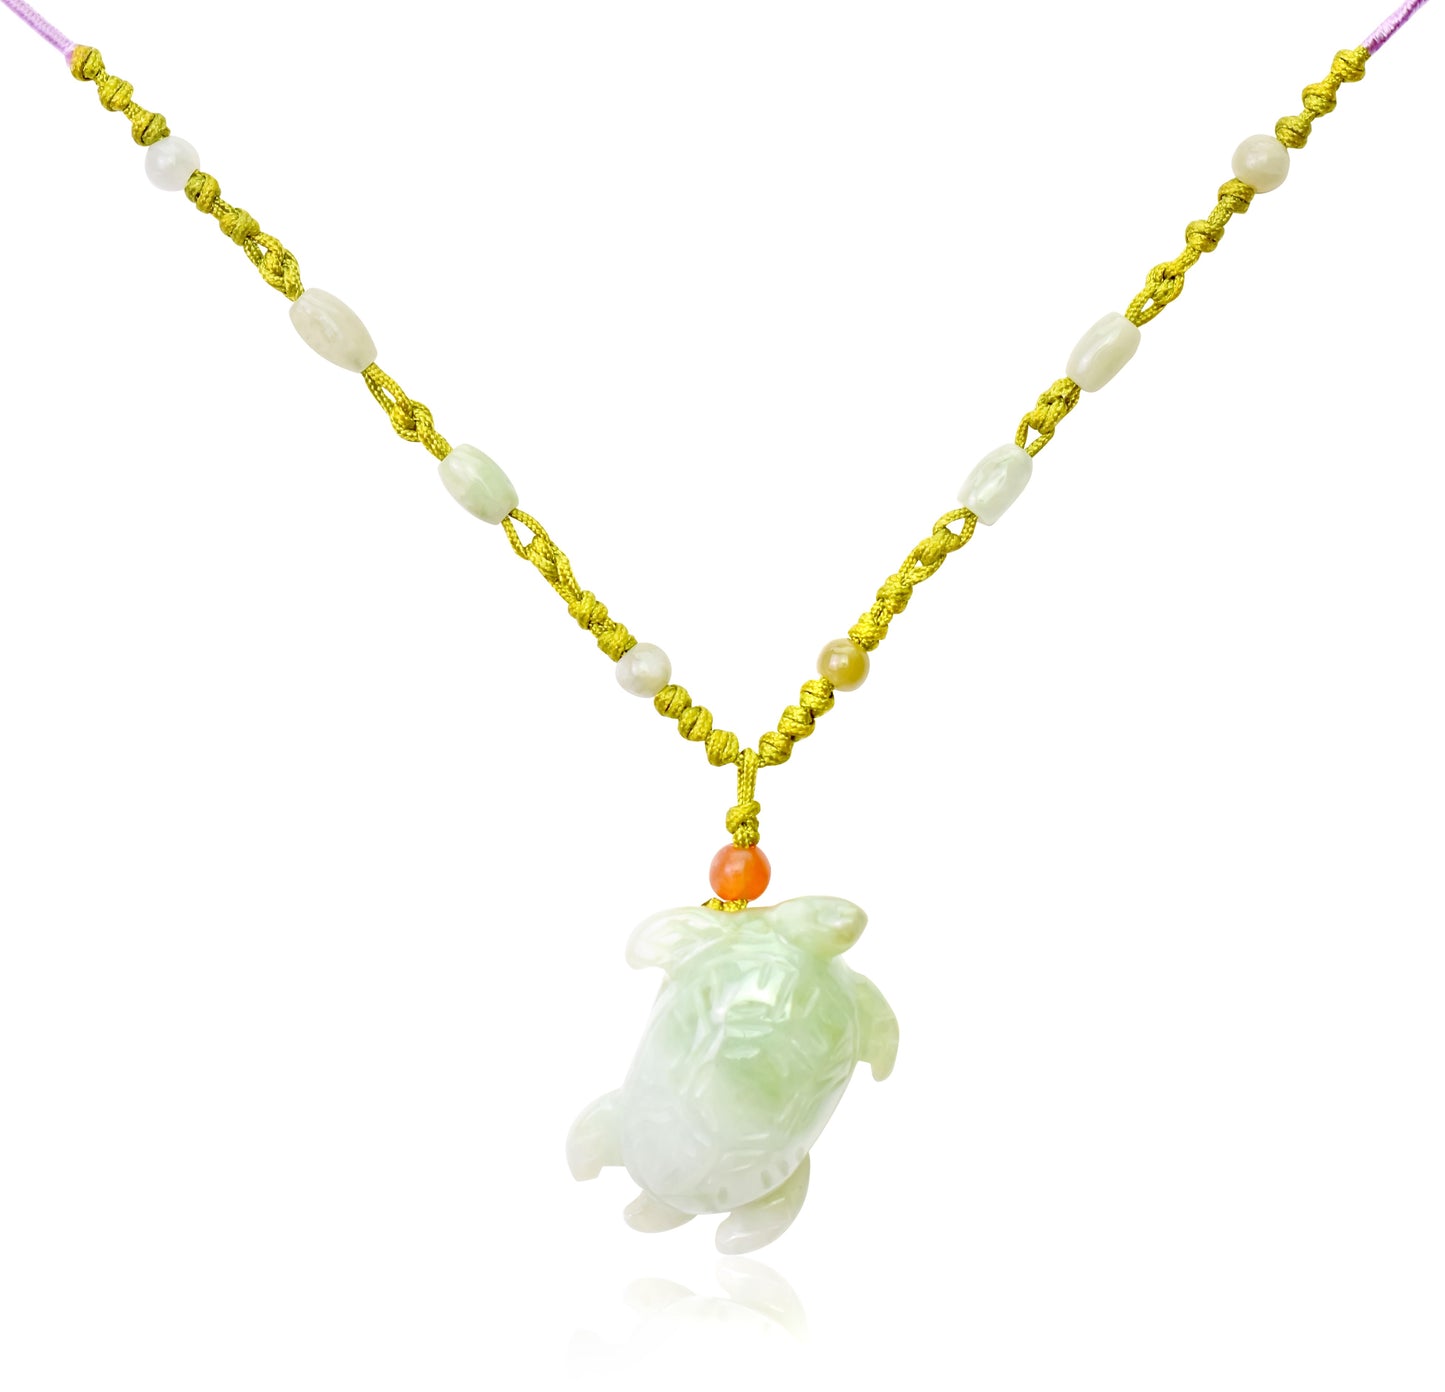 Get Good Luck and Spirituality with Turtle Jade Necklace made with Lime Cord